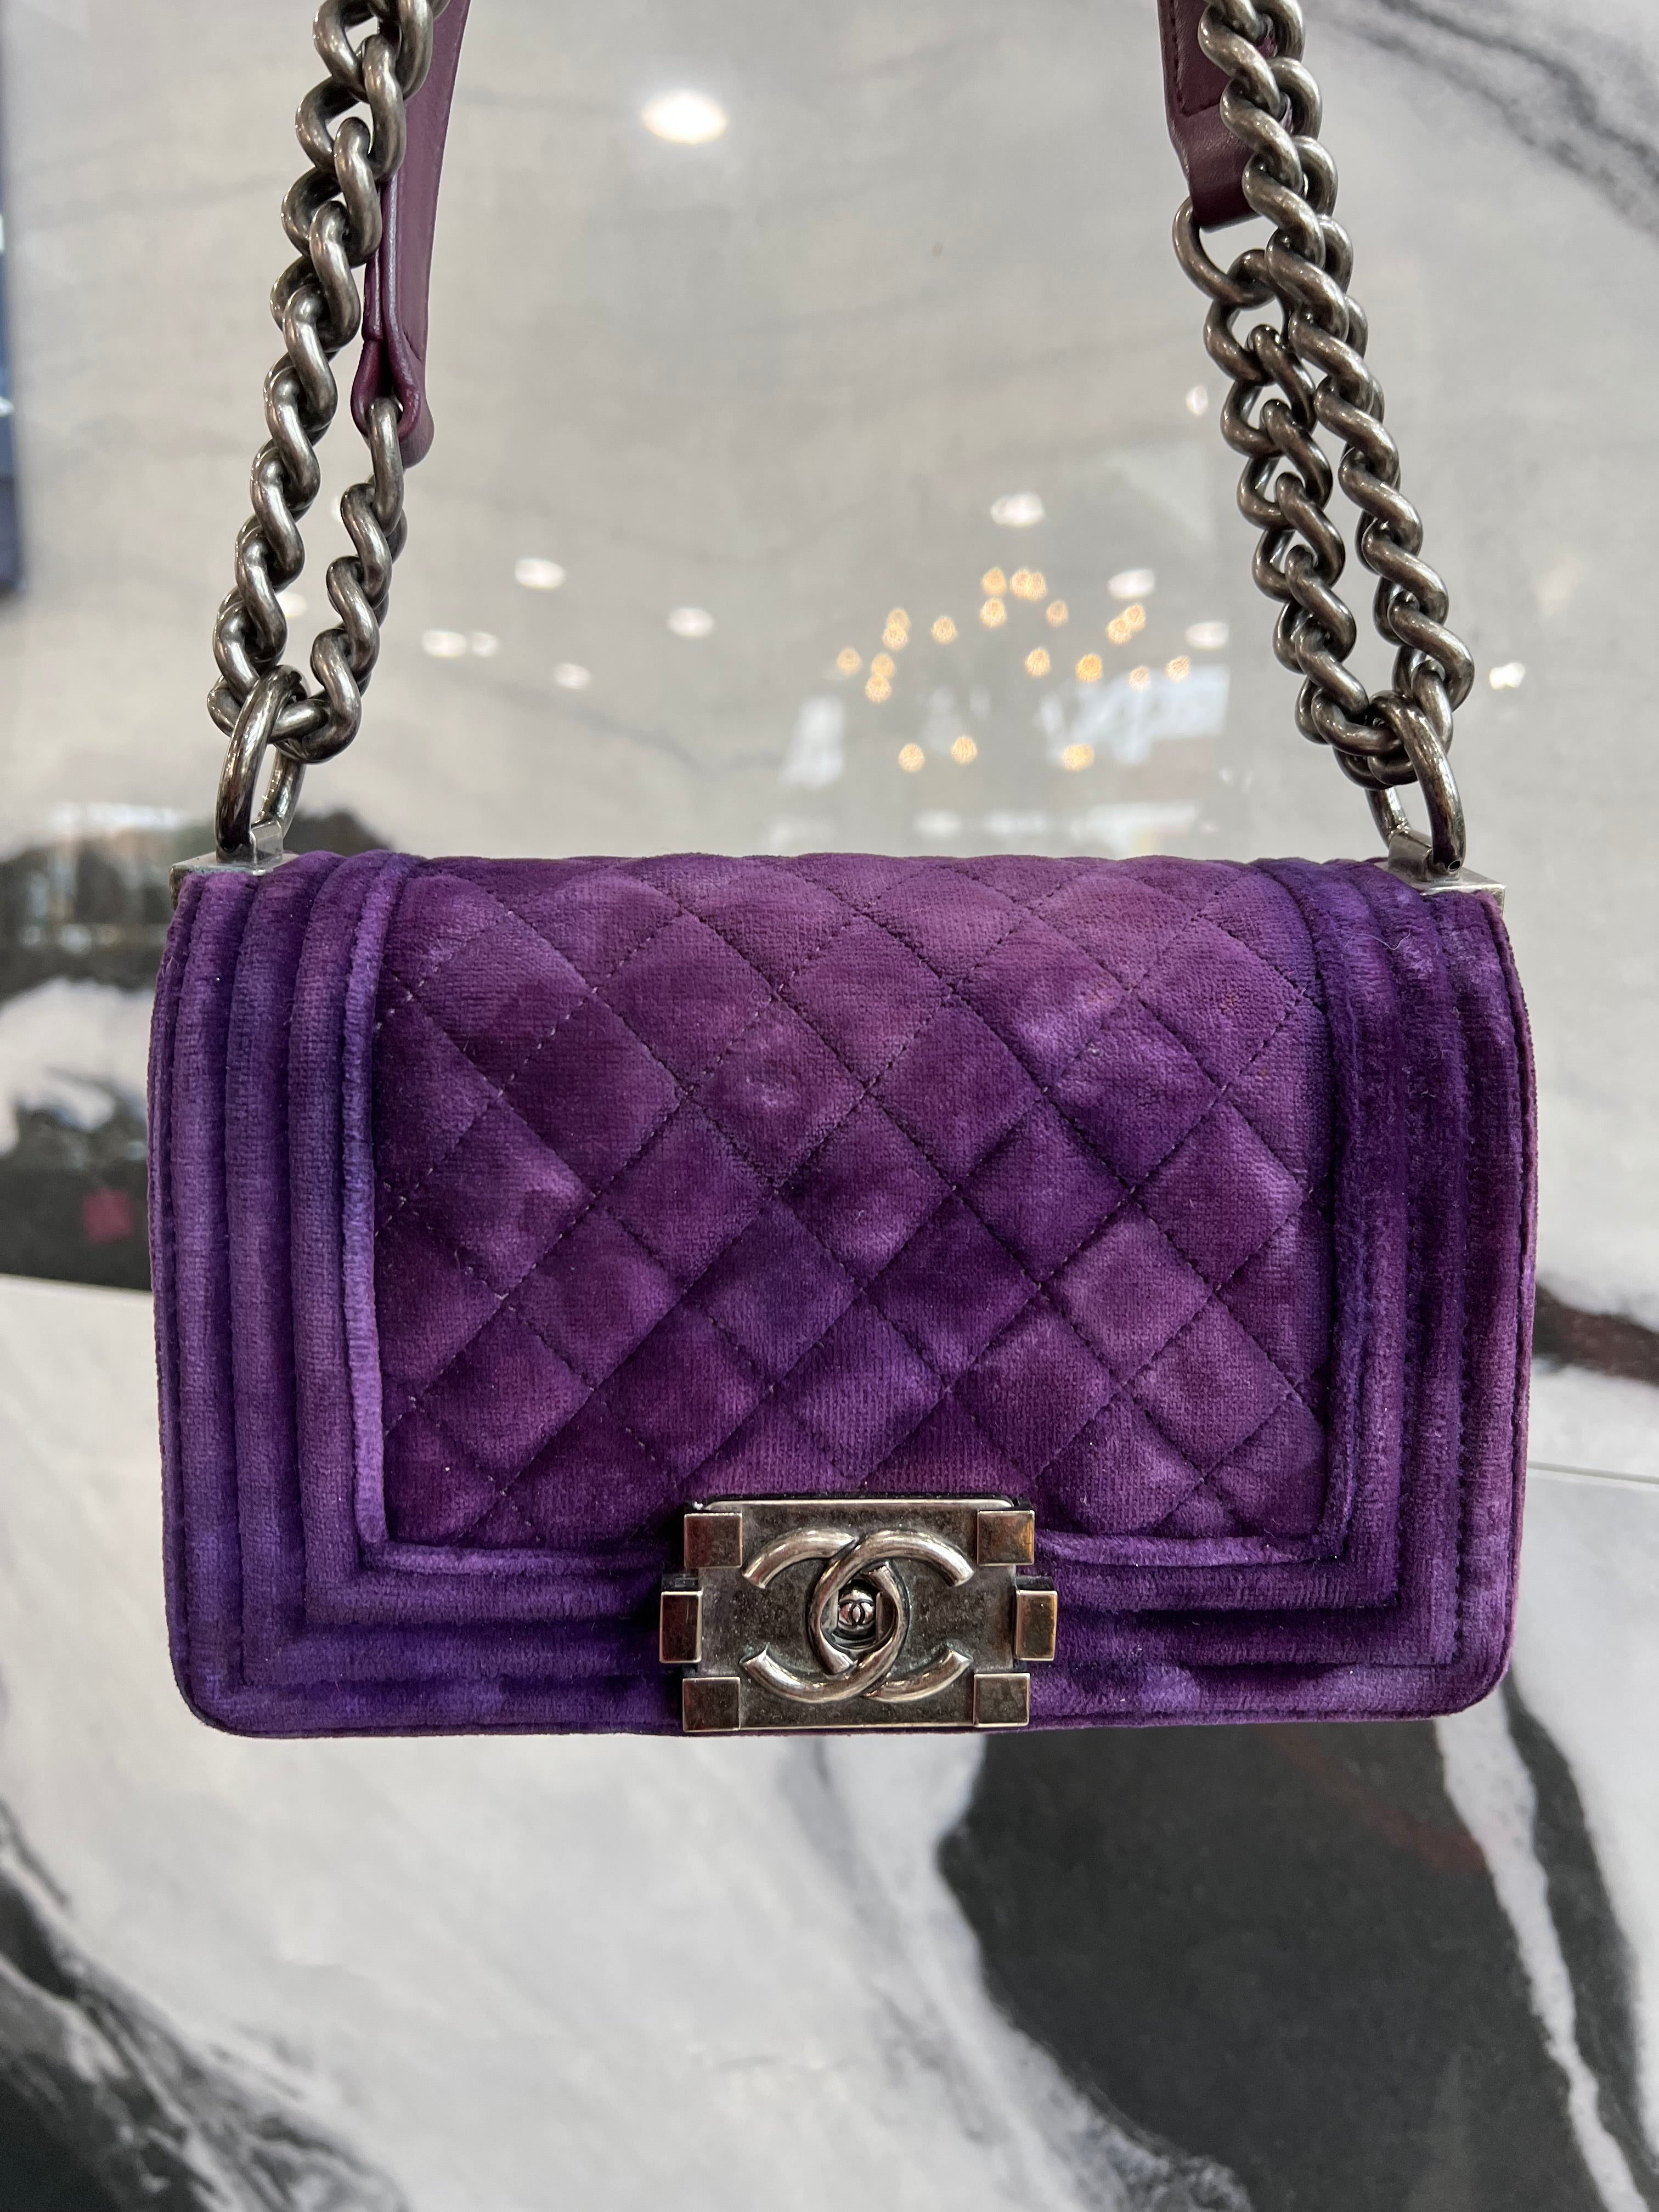 CHANEL VELVET QUILTED MINI BOY FLAP BAG IN PURPLE